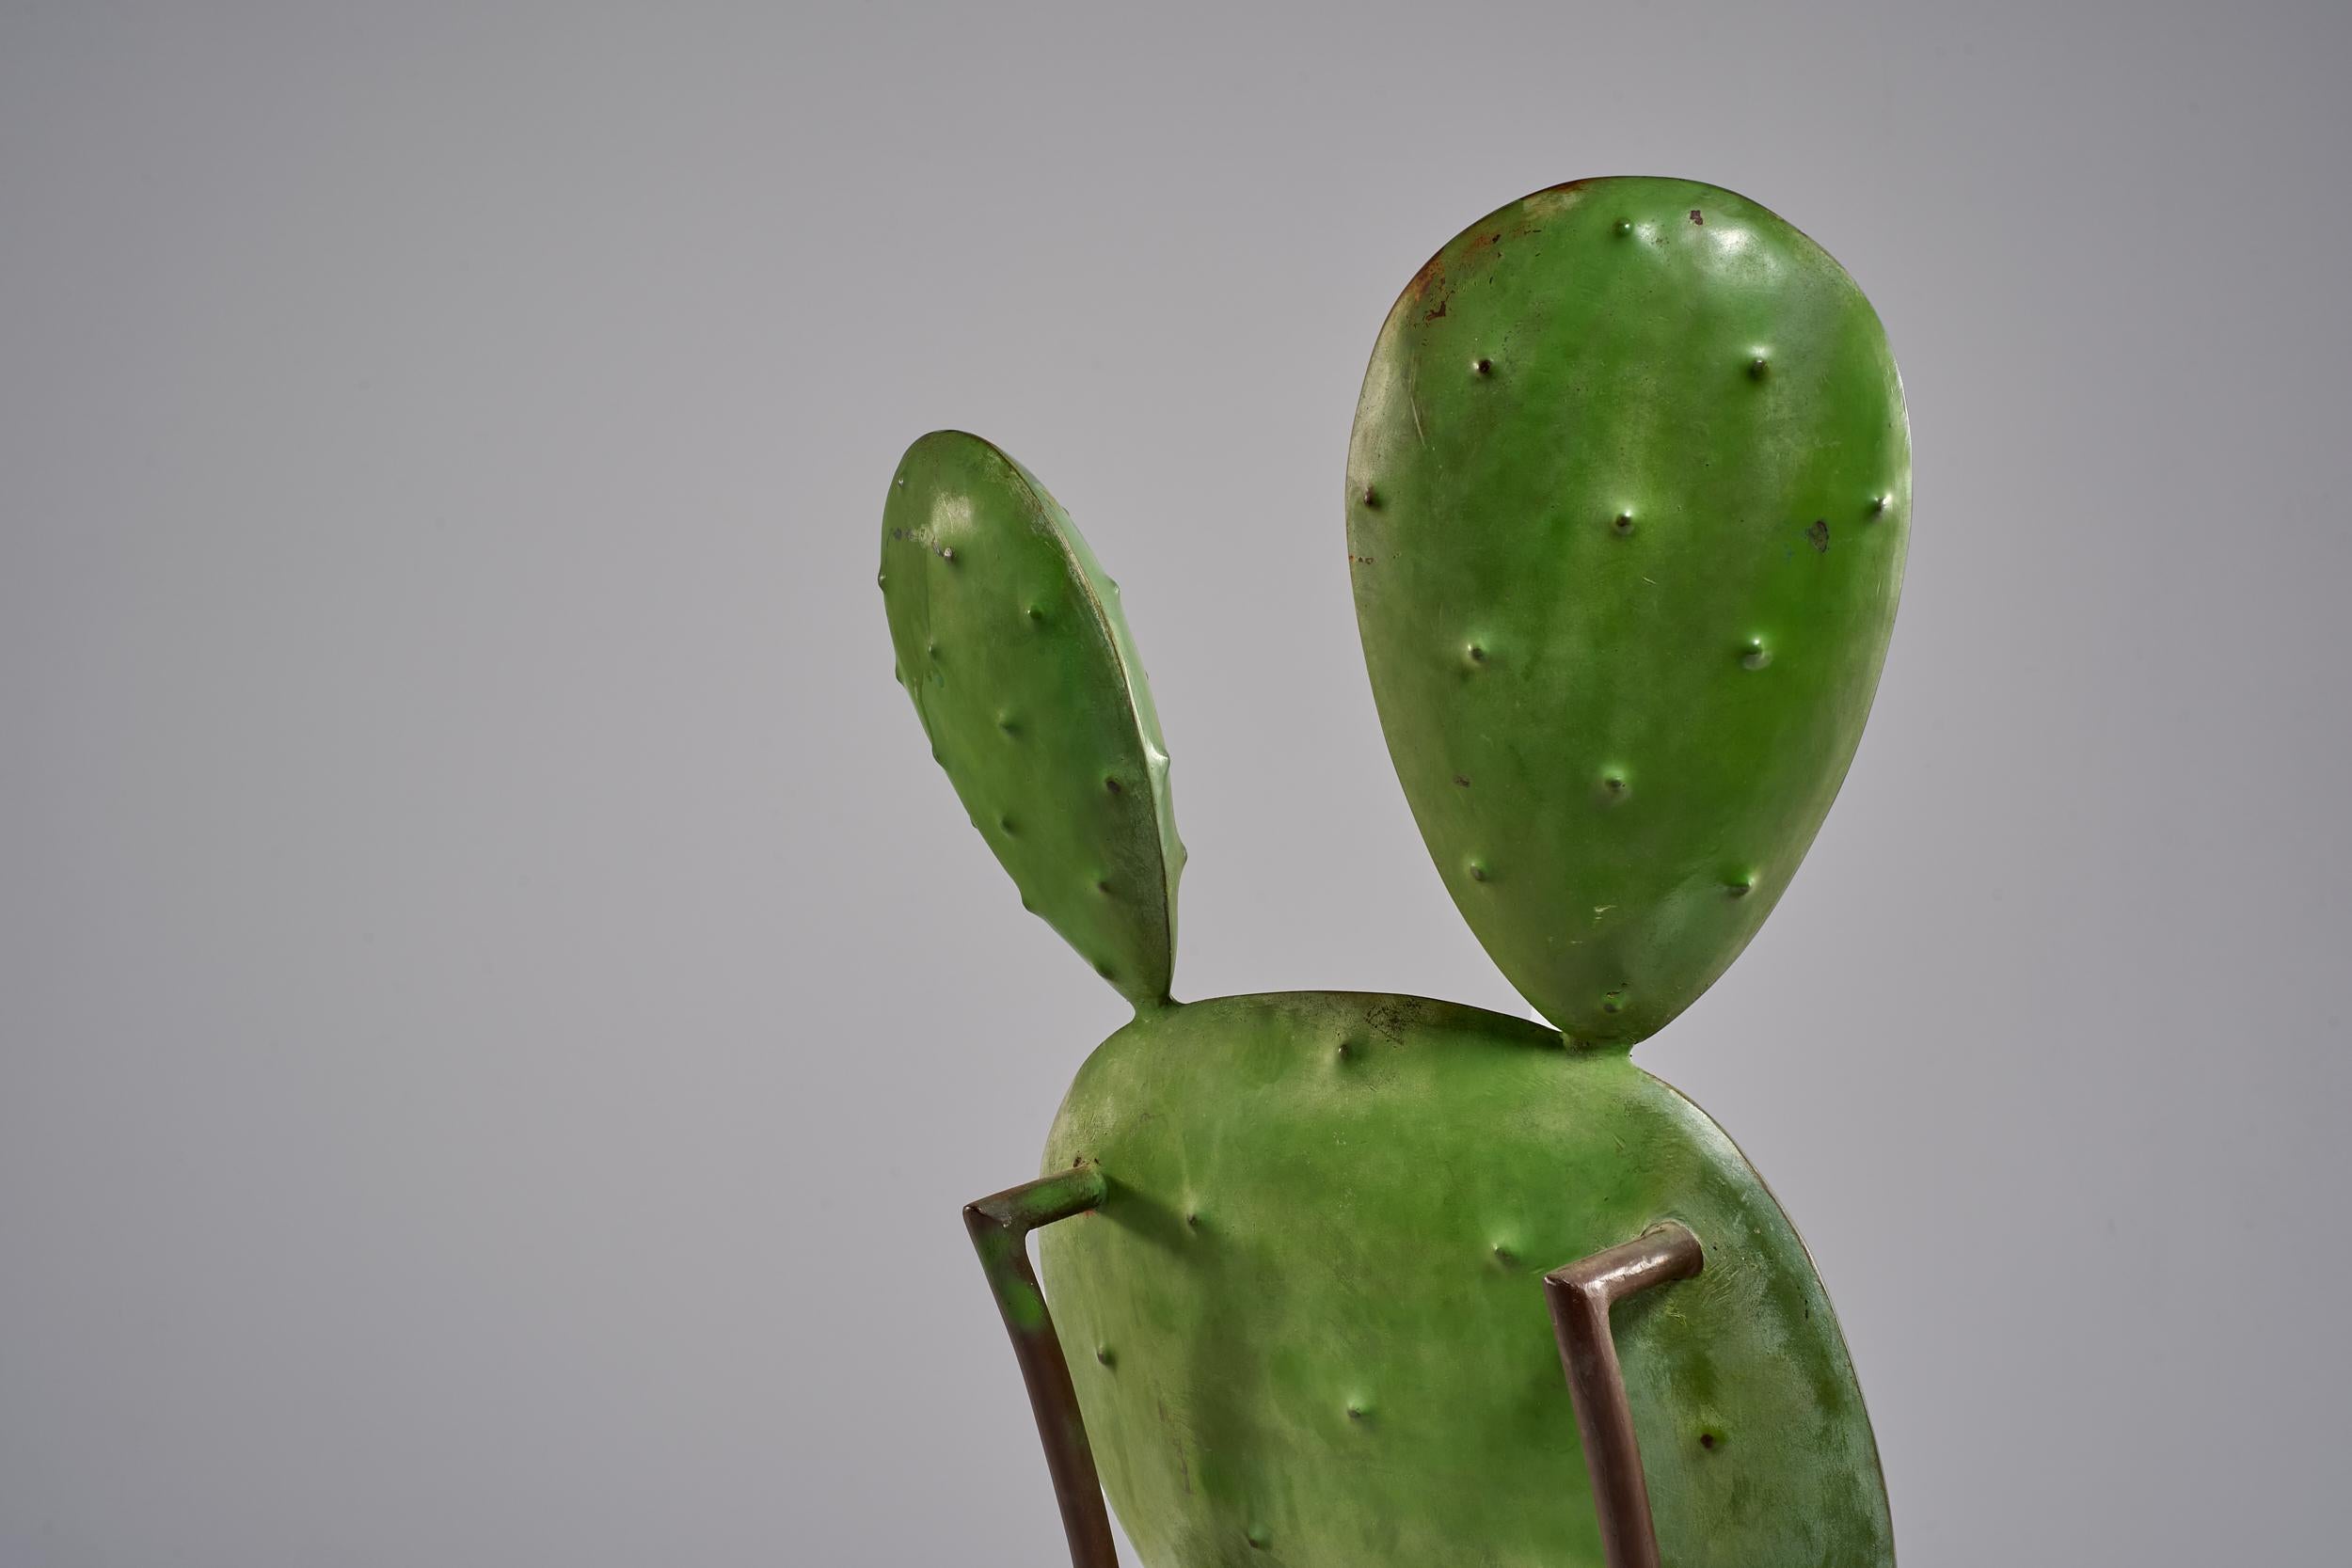 Metal Chair with Cactus-Like Decorative Elements, 1970 circa 1